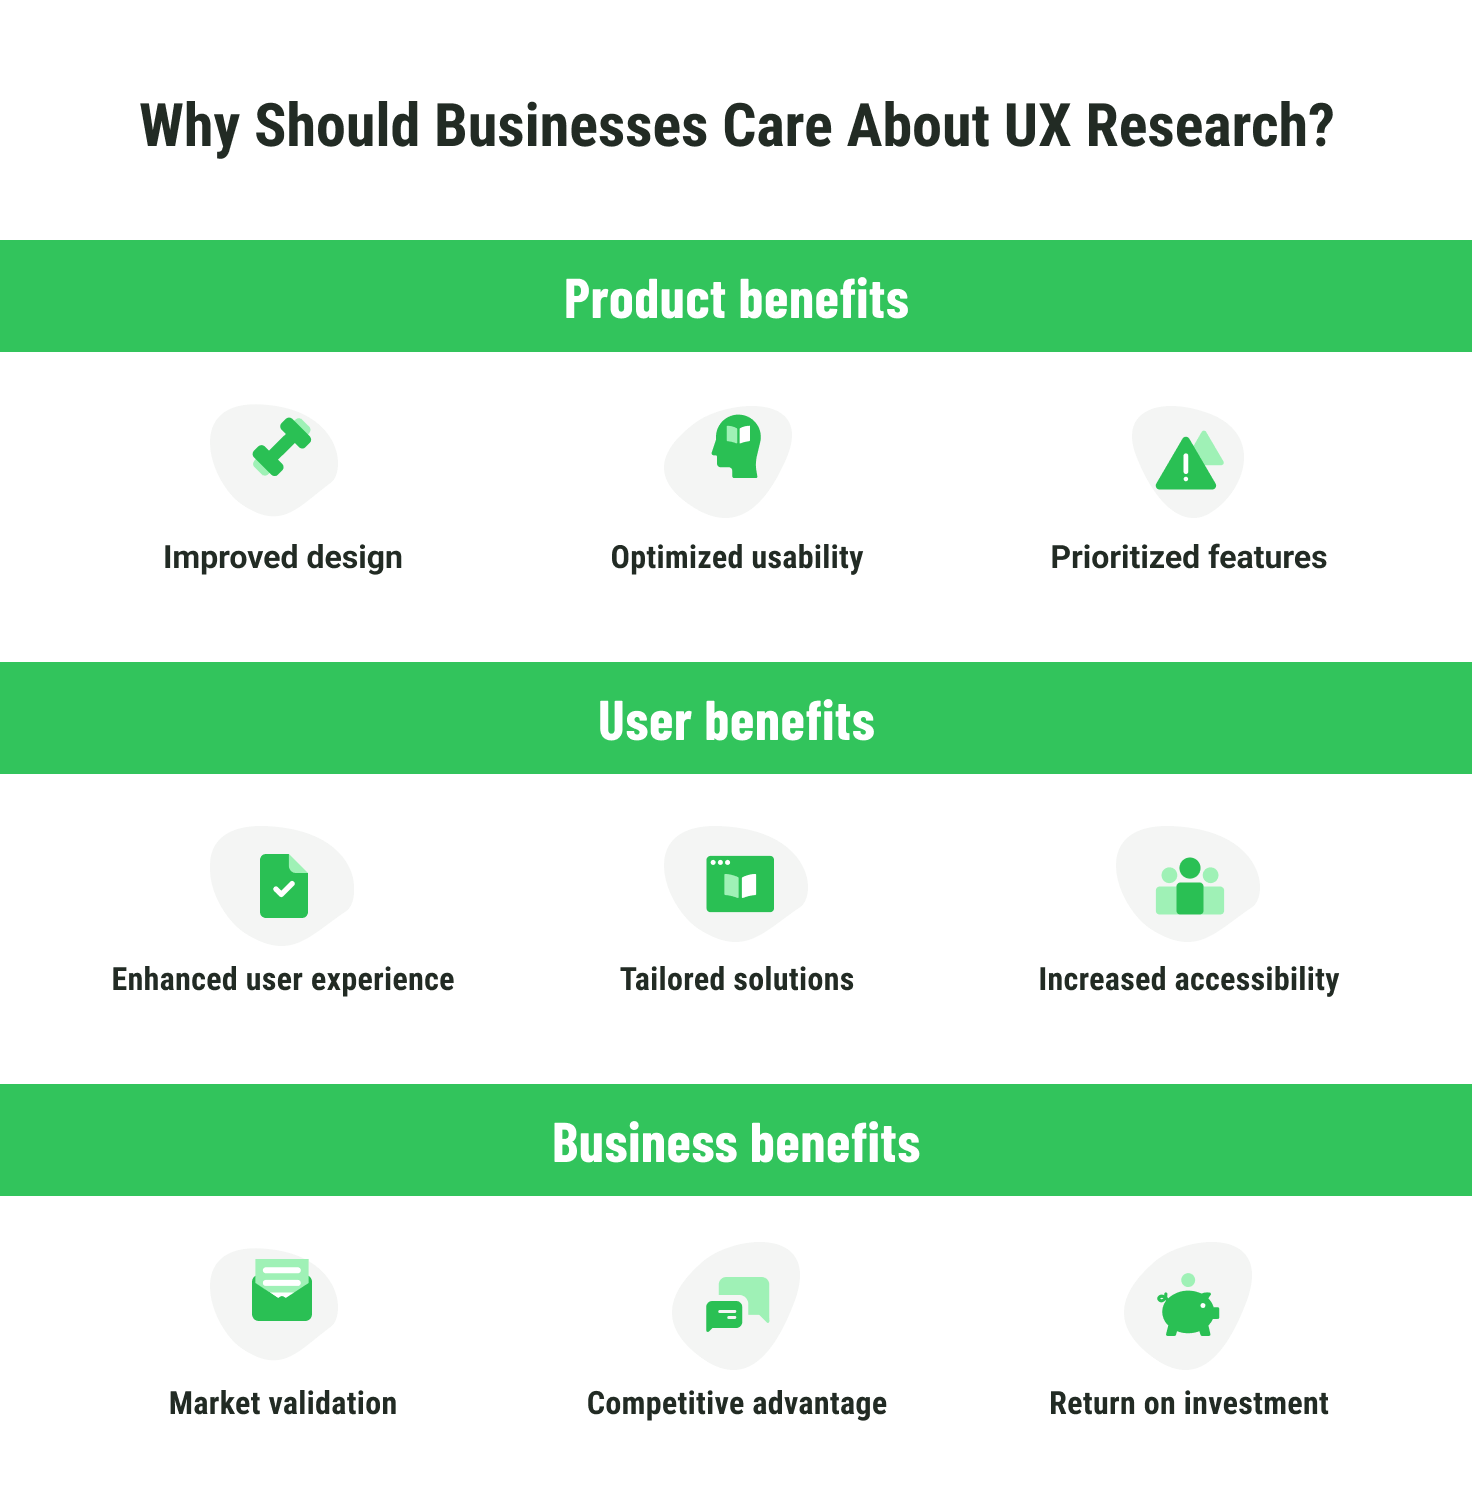 Benefits of UX research